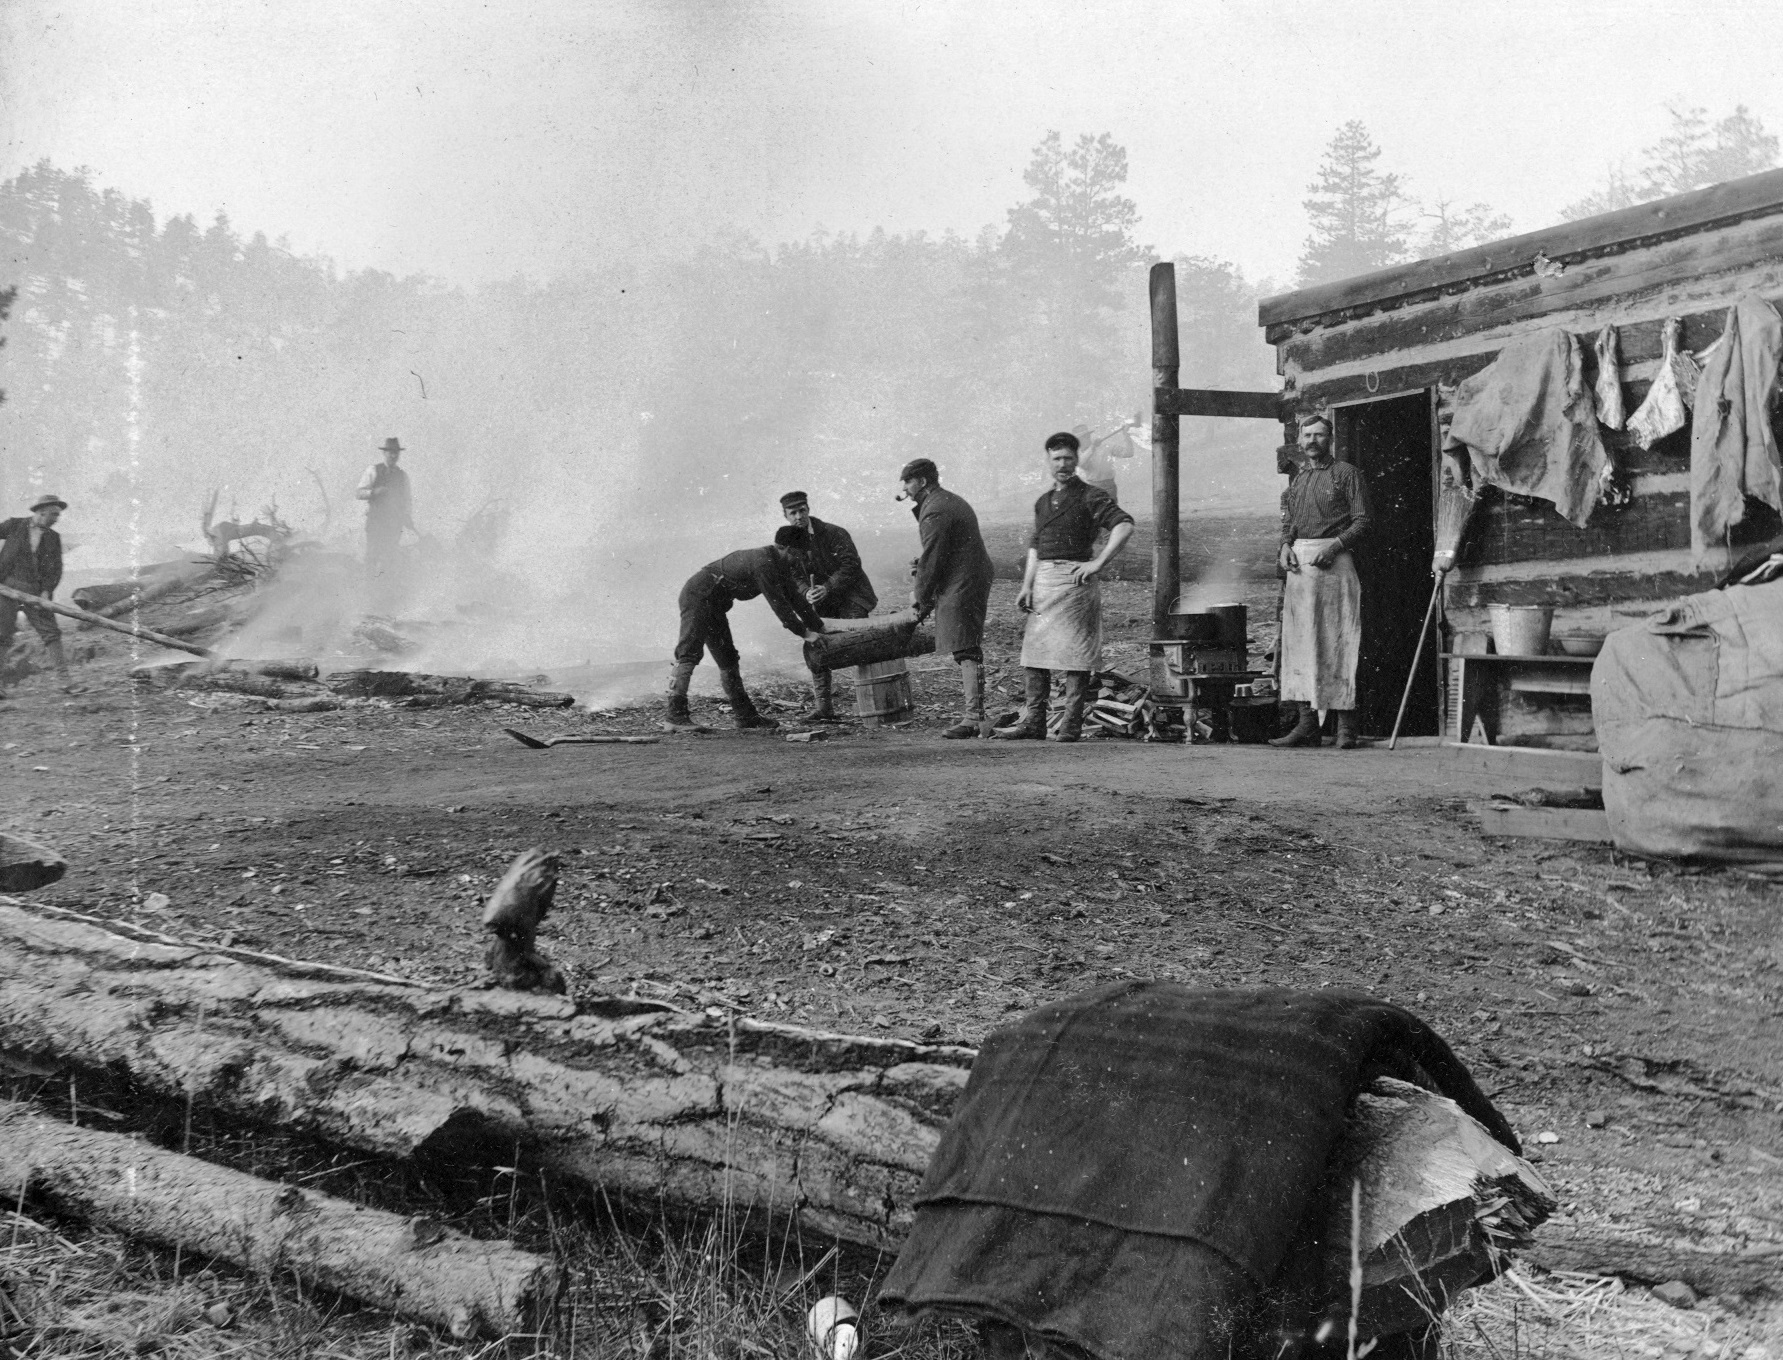 Because their shovels could only do so much, crews had to burn the ground to defrost it before they could dig down to build the foundation of a cabin at Lake Cheesman in 1896.